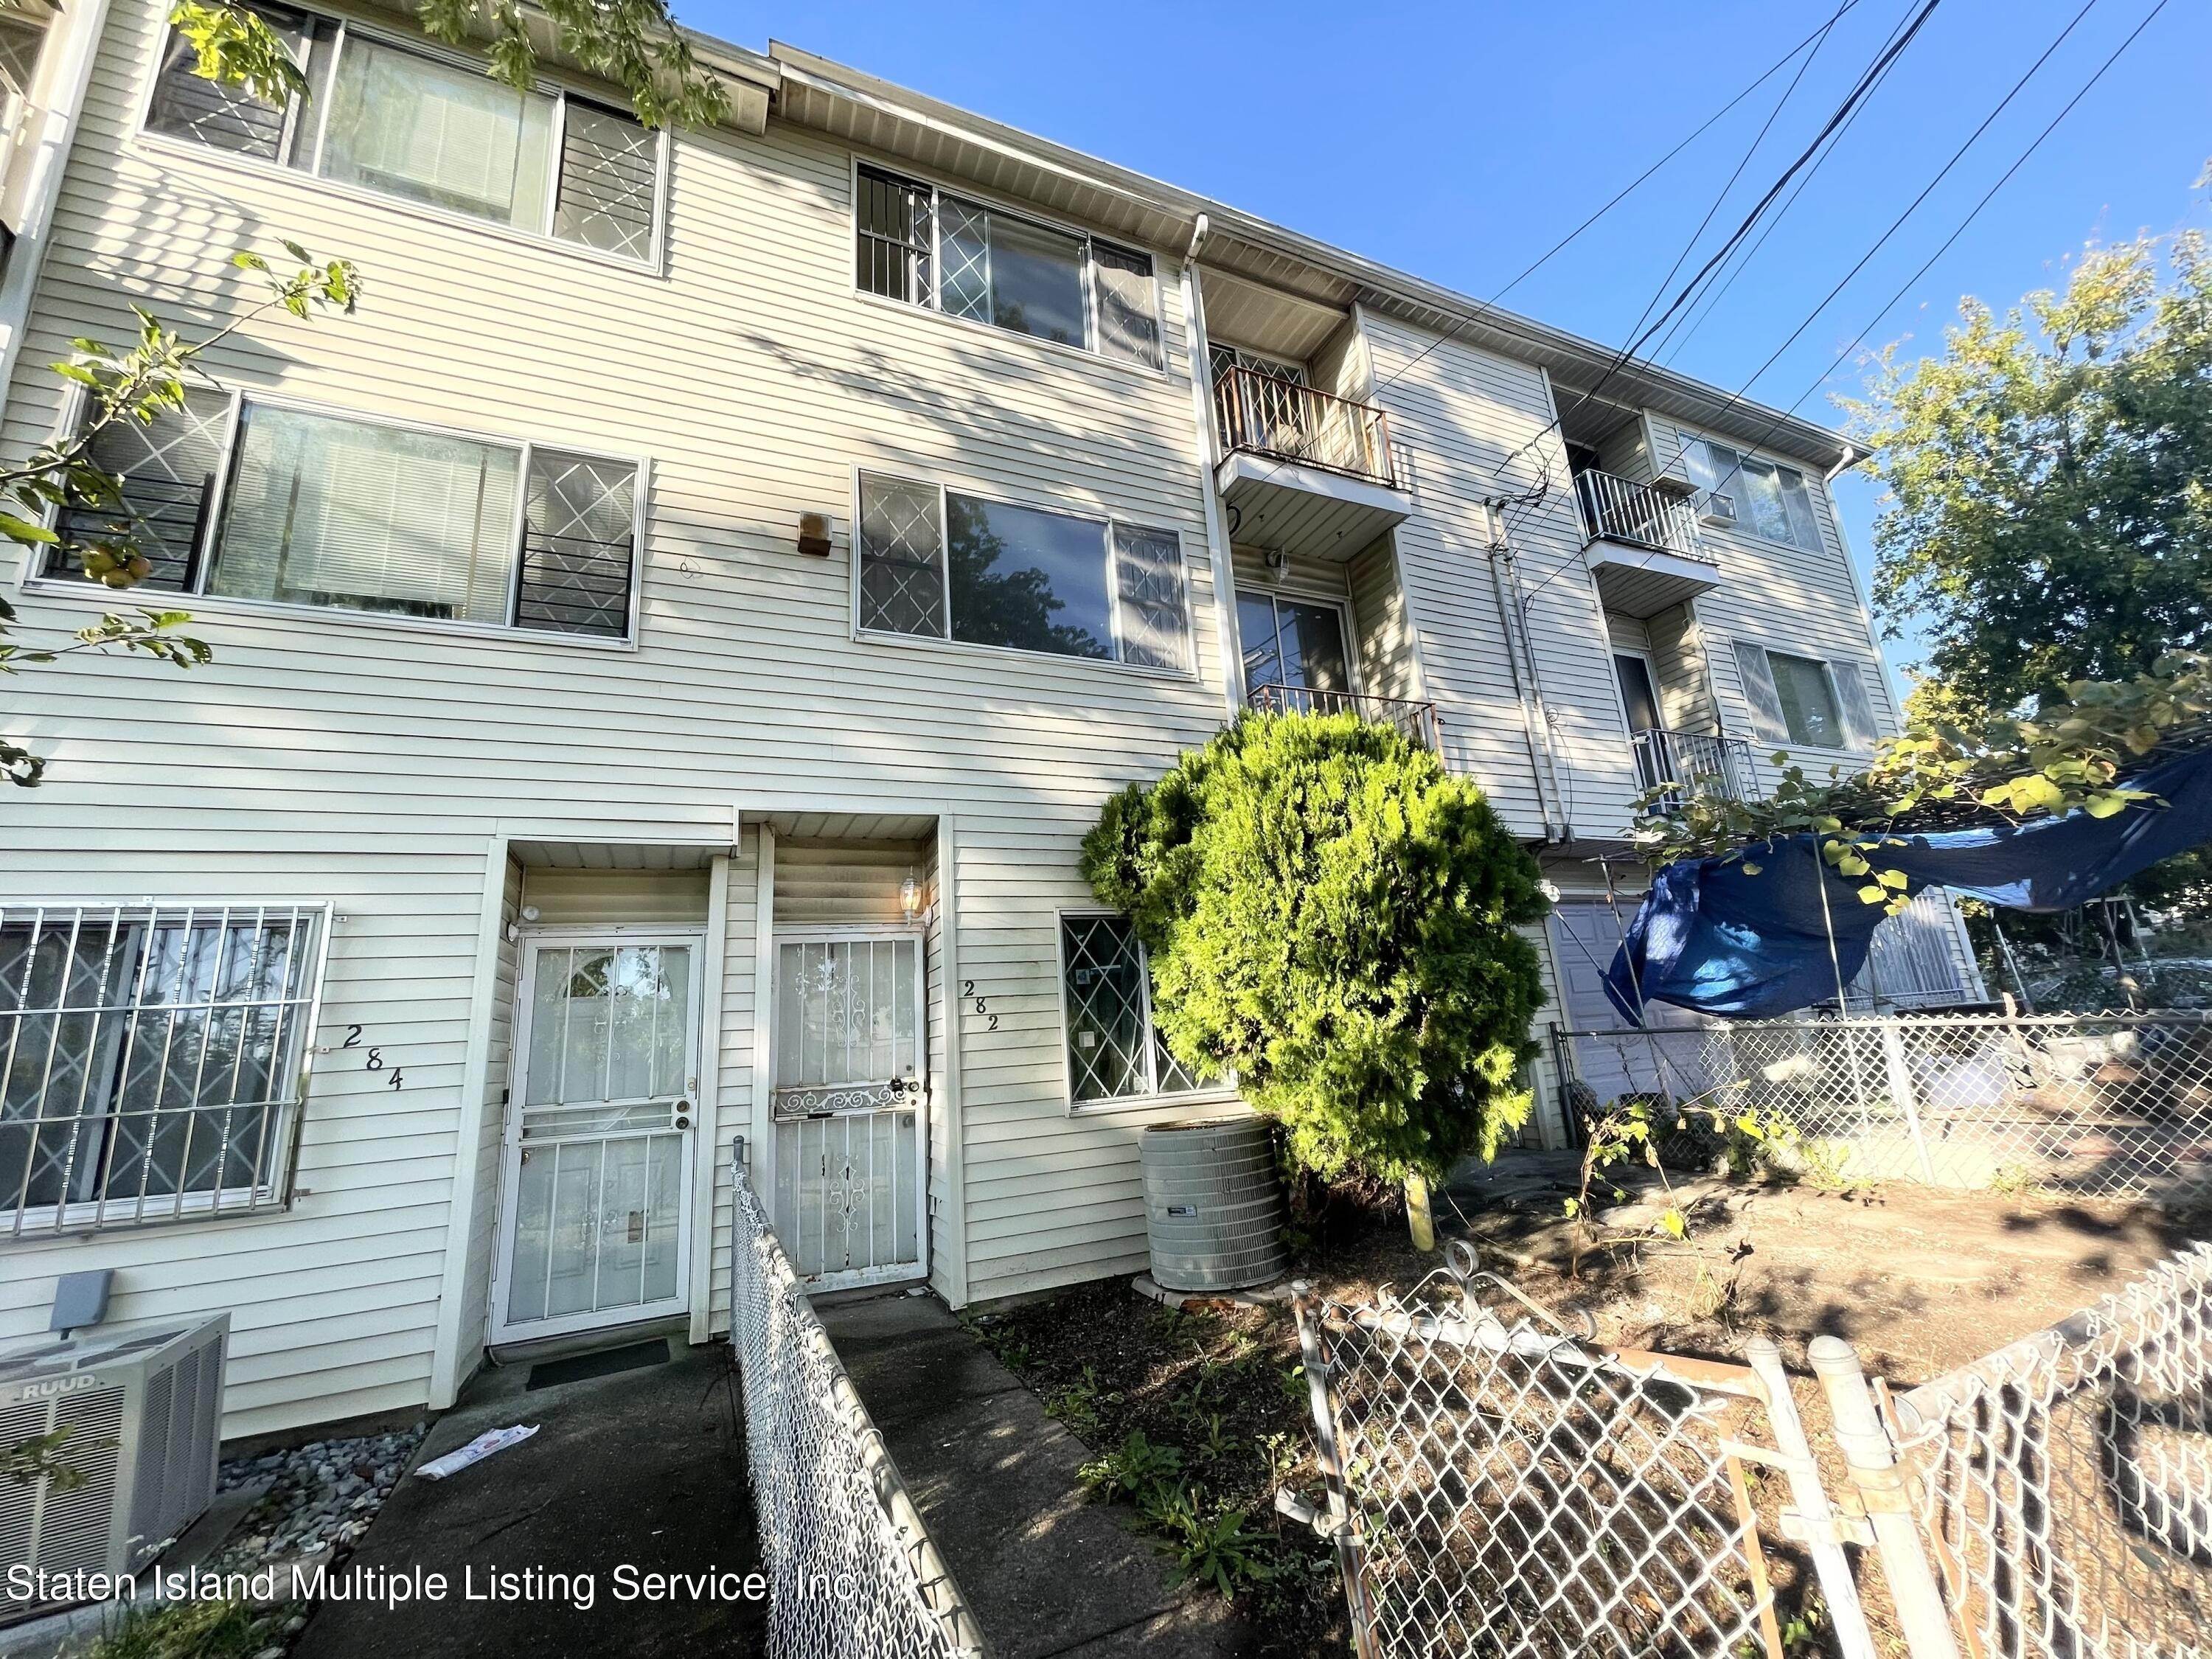 Townhouse for Sale at Park Hill, Staten Island, NY 10304